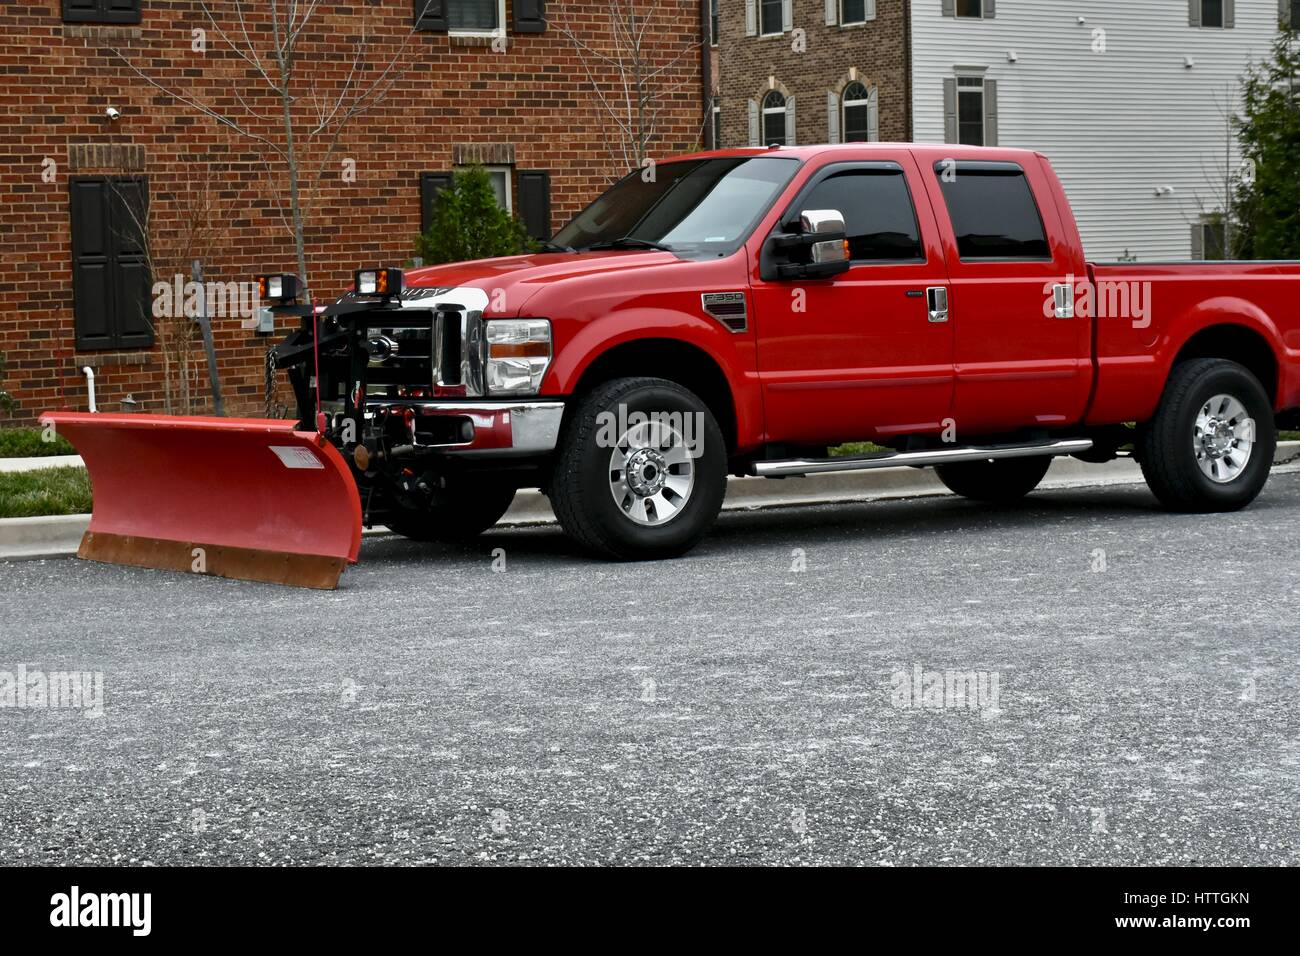 Ford pickup truck with snow plow attachment Stock Photo